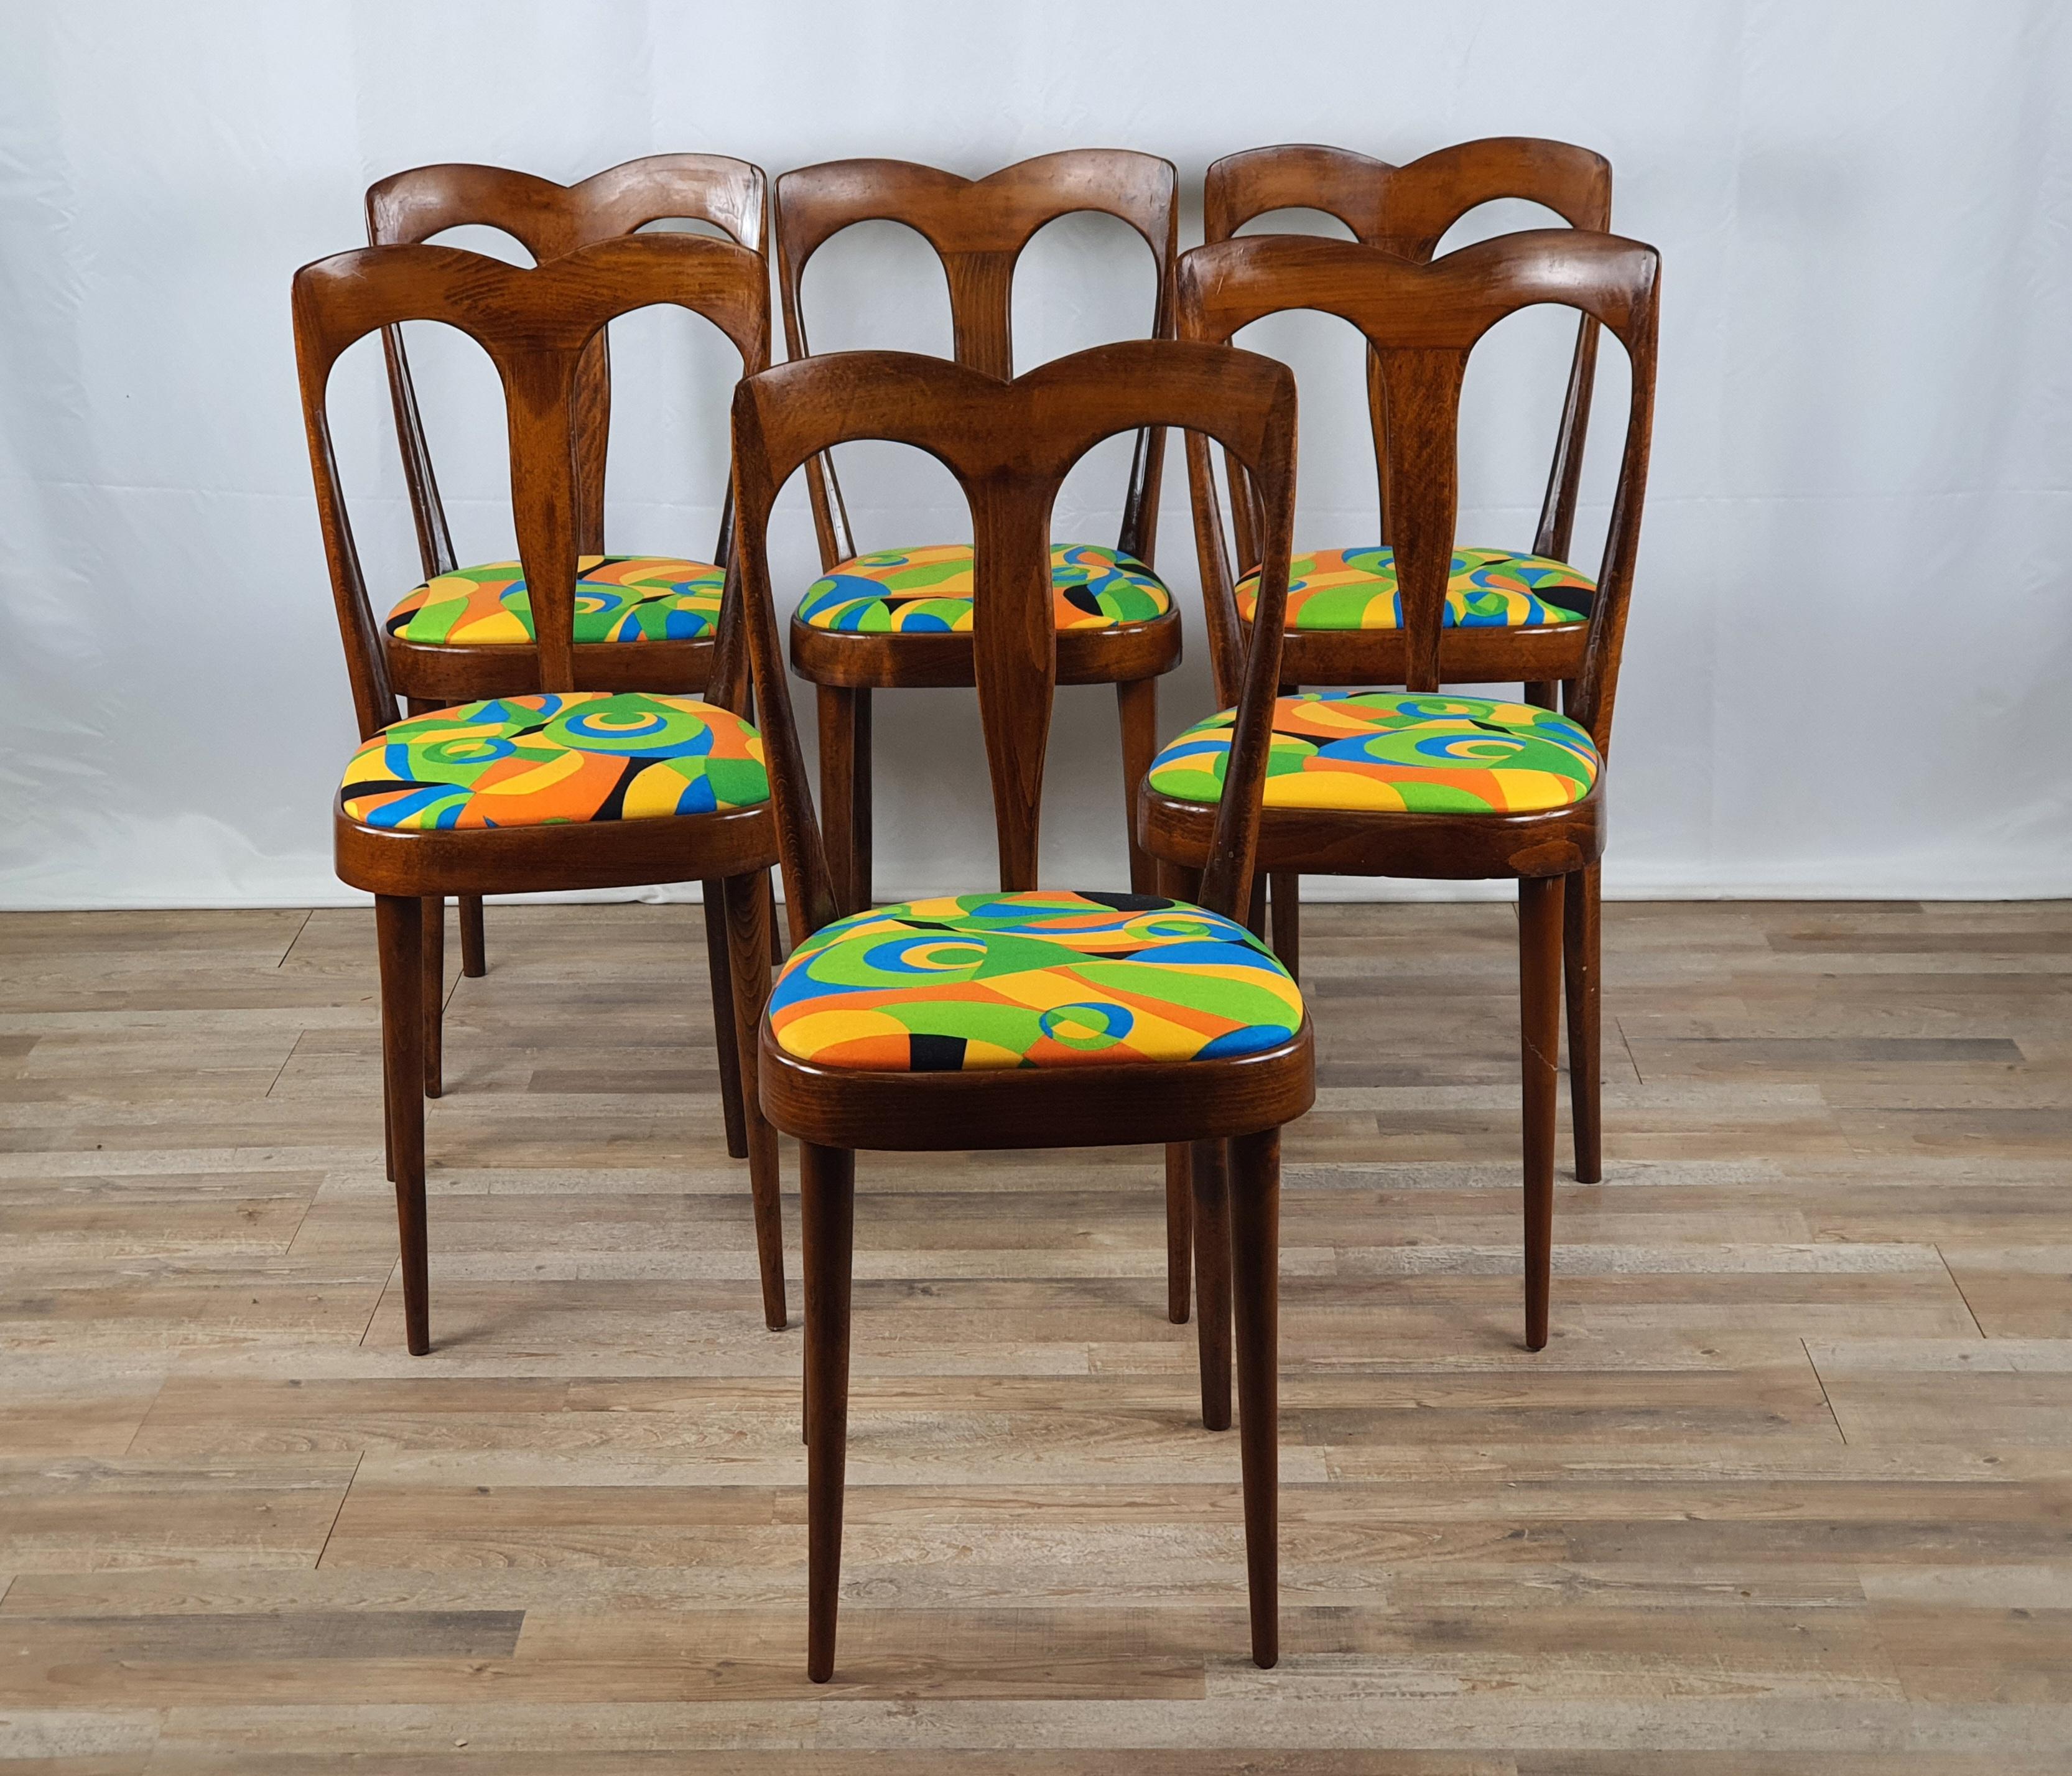 Set of six elegant early 1950s Italian wooden chairs with upholstered seat, ideal for antique or modern dining rooms with a one of a kind contrast.

The chairs have been polished with oil and shellac while the seats have all been reupholstered